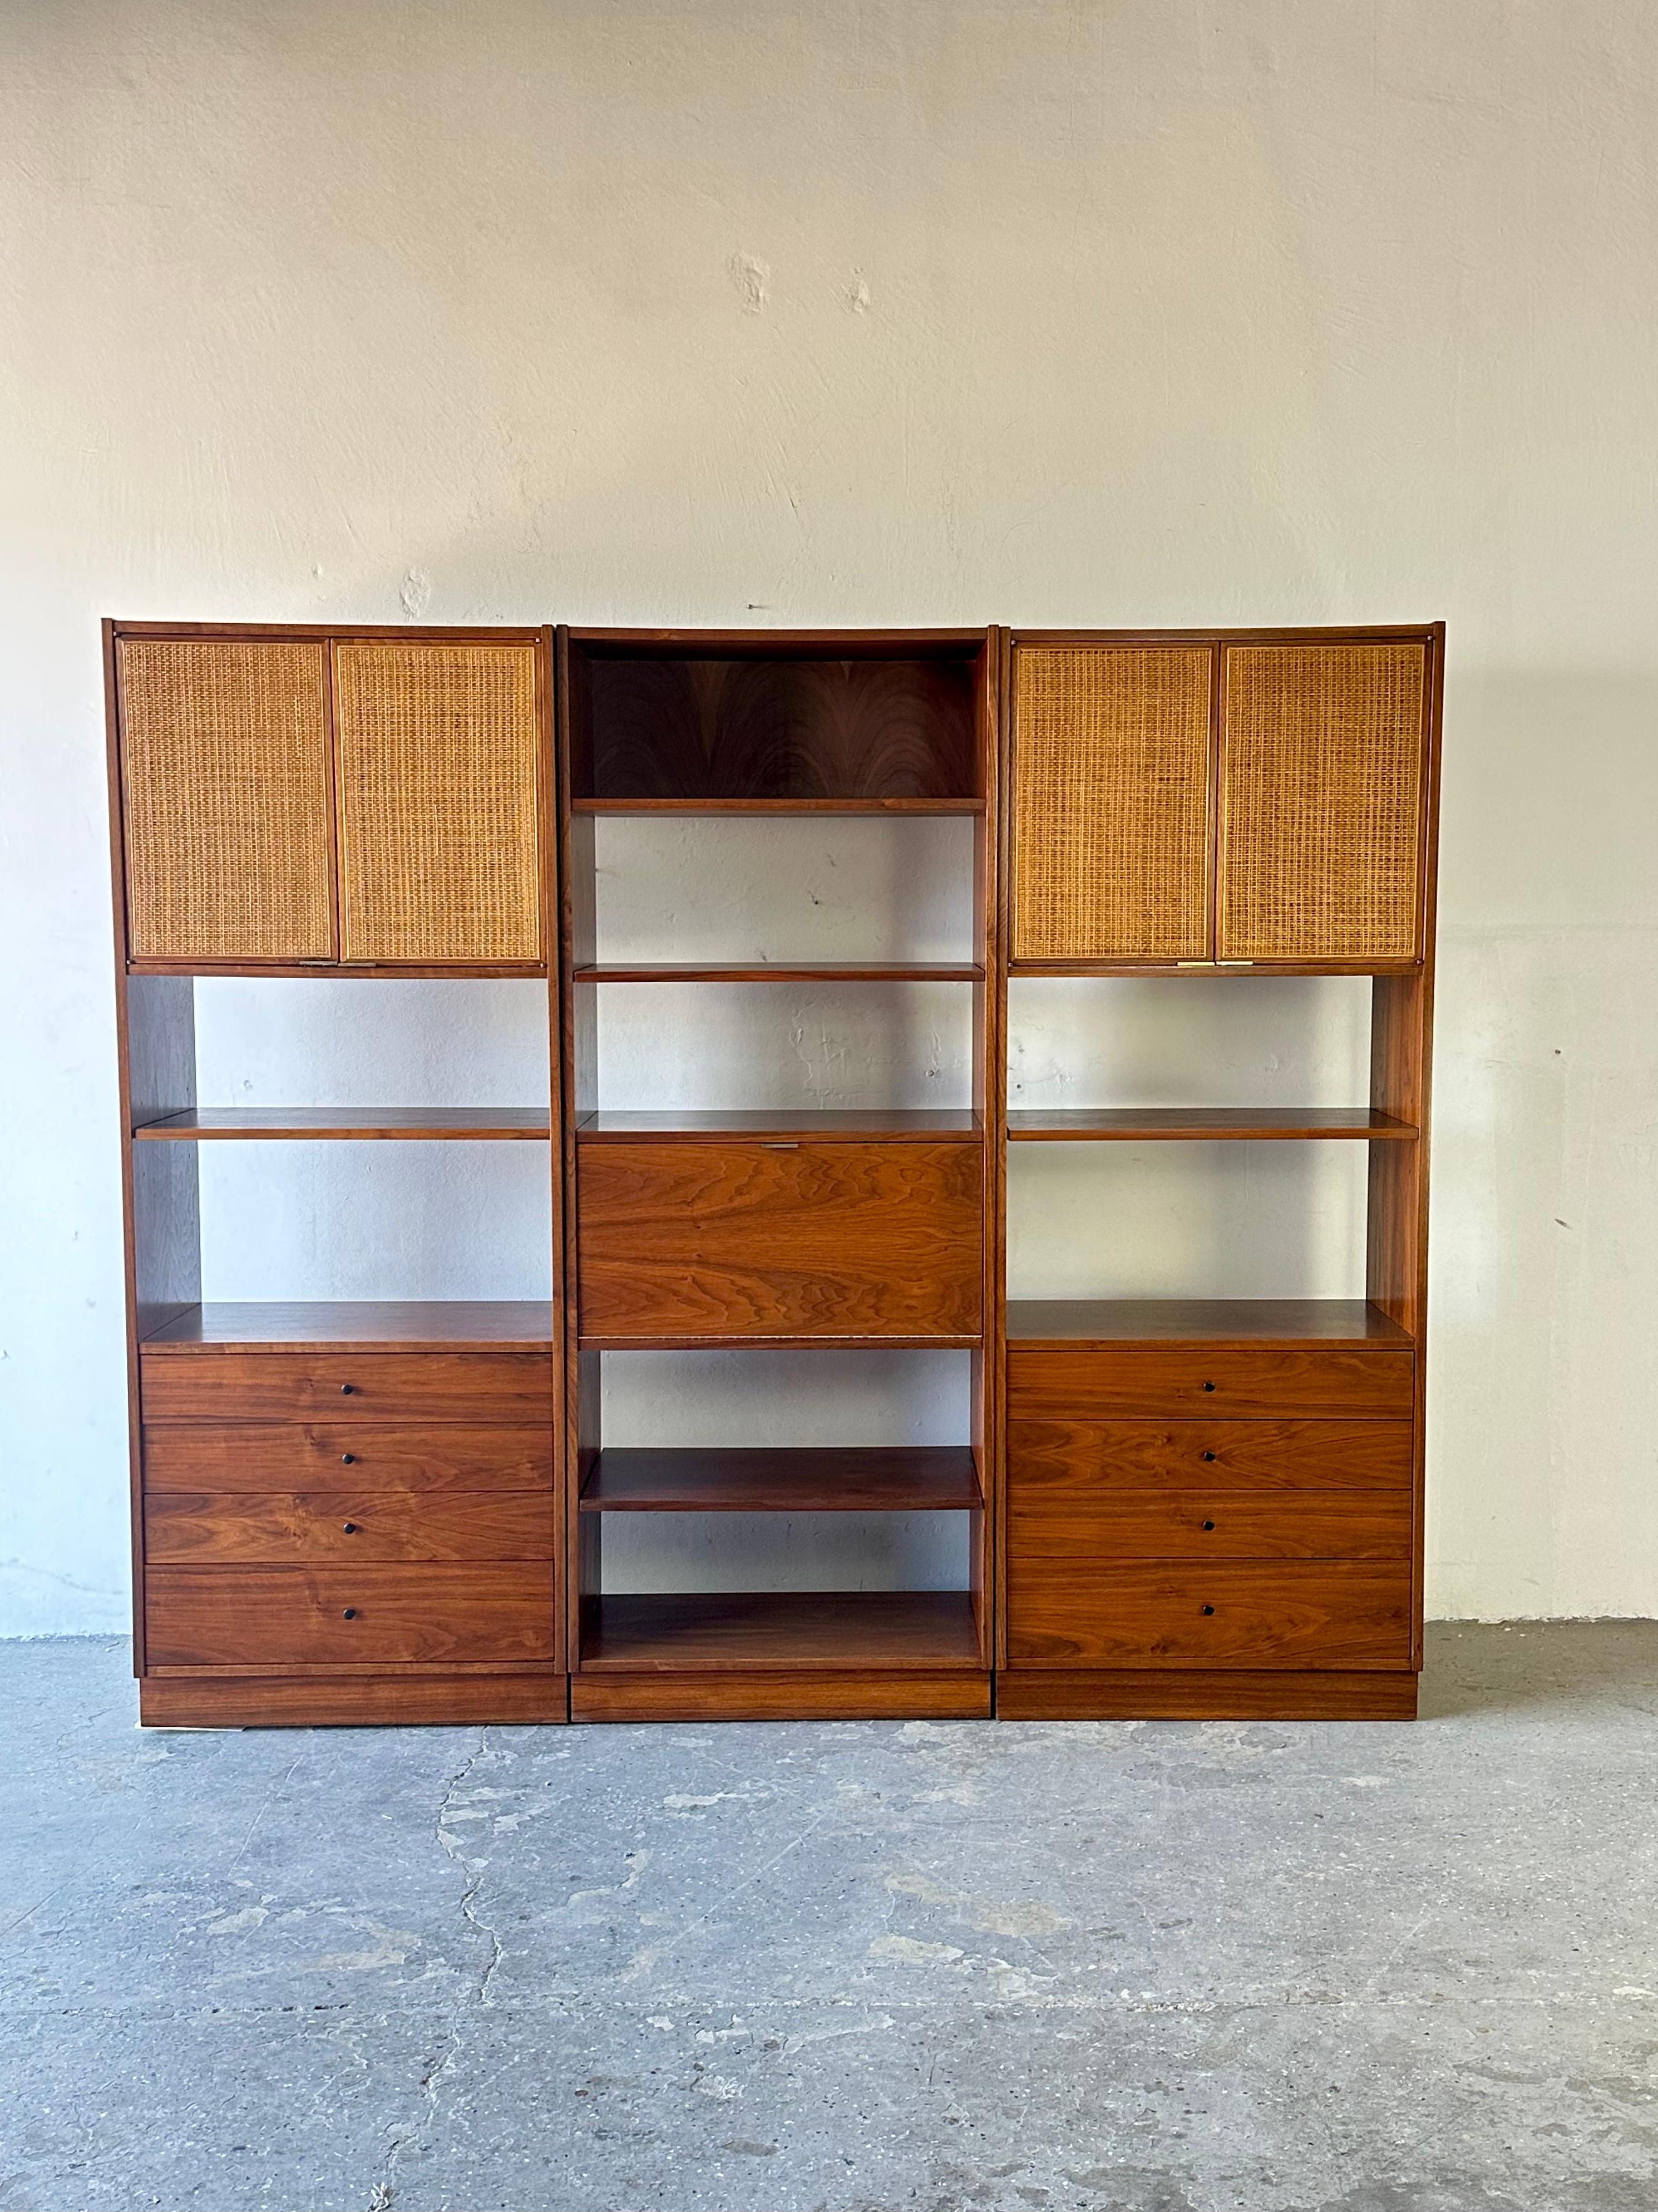 Midcentury Jack Cartwright For Founders - Room Divider Wall Unit


A beautifully Refinished and restored three part, walnut and cane, free standing Wall Unit or room Divider by Jack Cartwright for Founders. Dimensions : 78